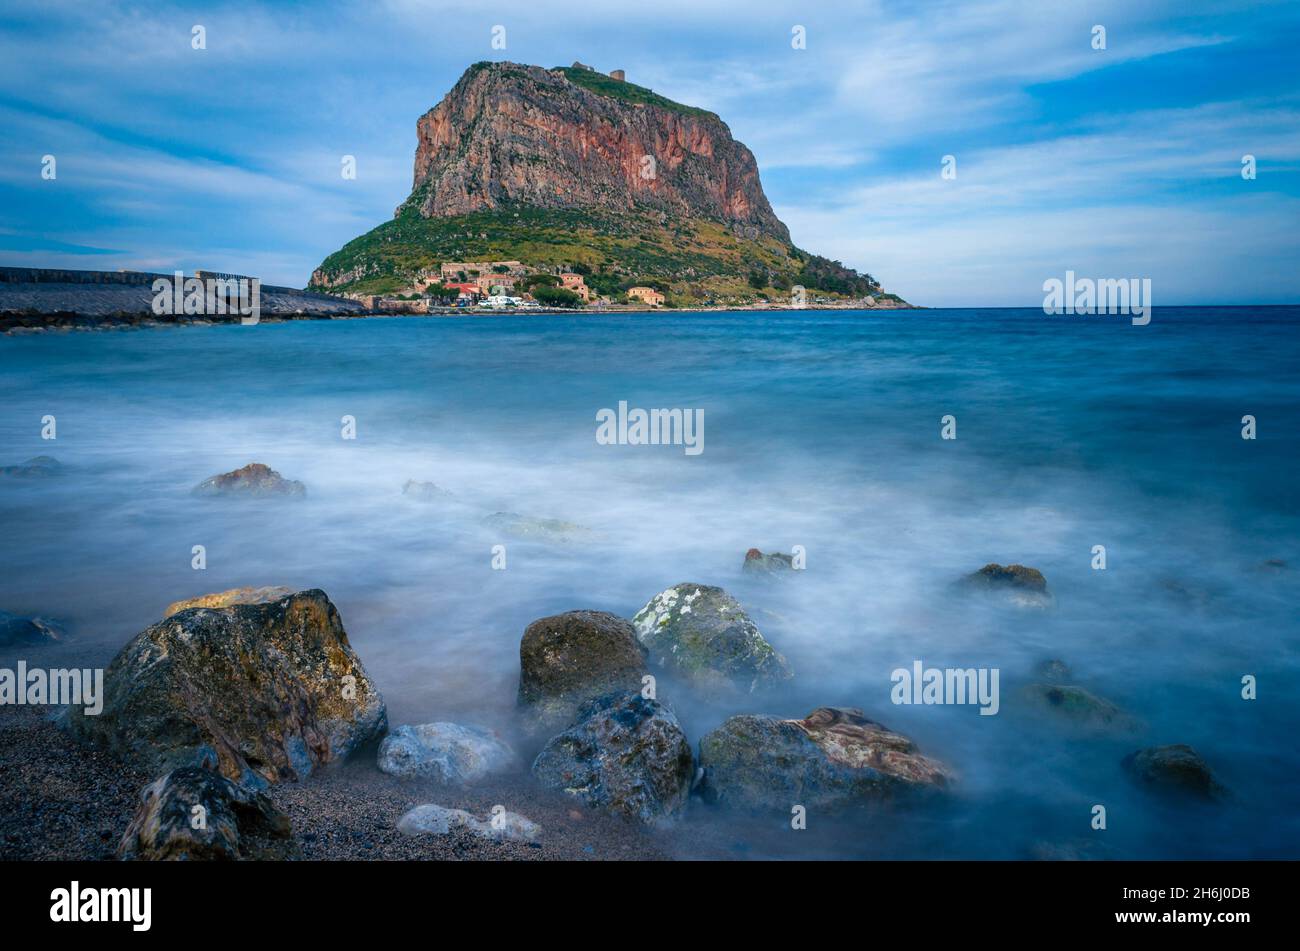 Monemvasia, the medieval castle town located on a small island off the east coast of the Peloponnese. Stock Photo